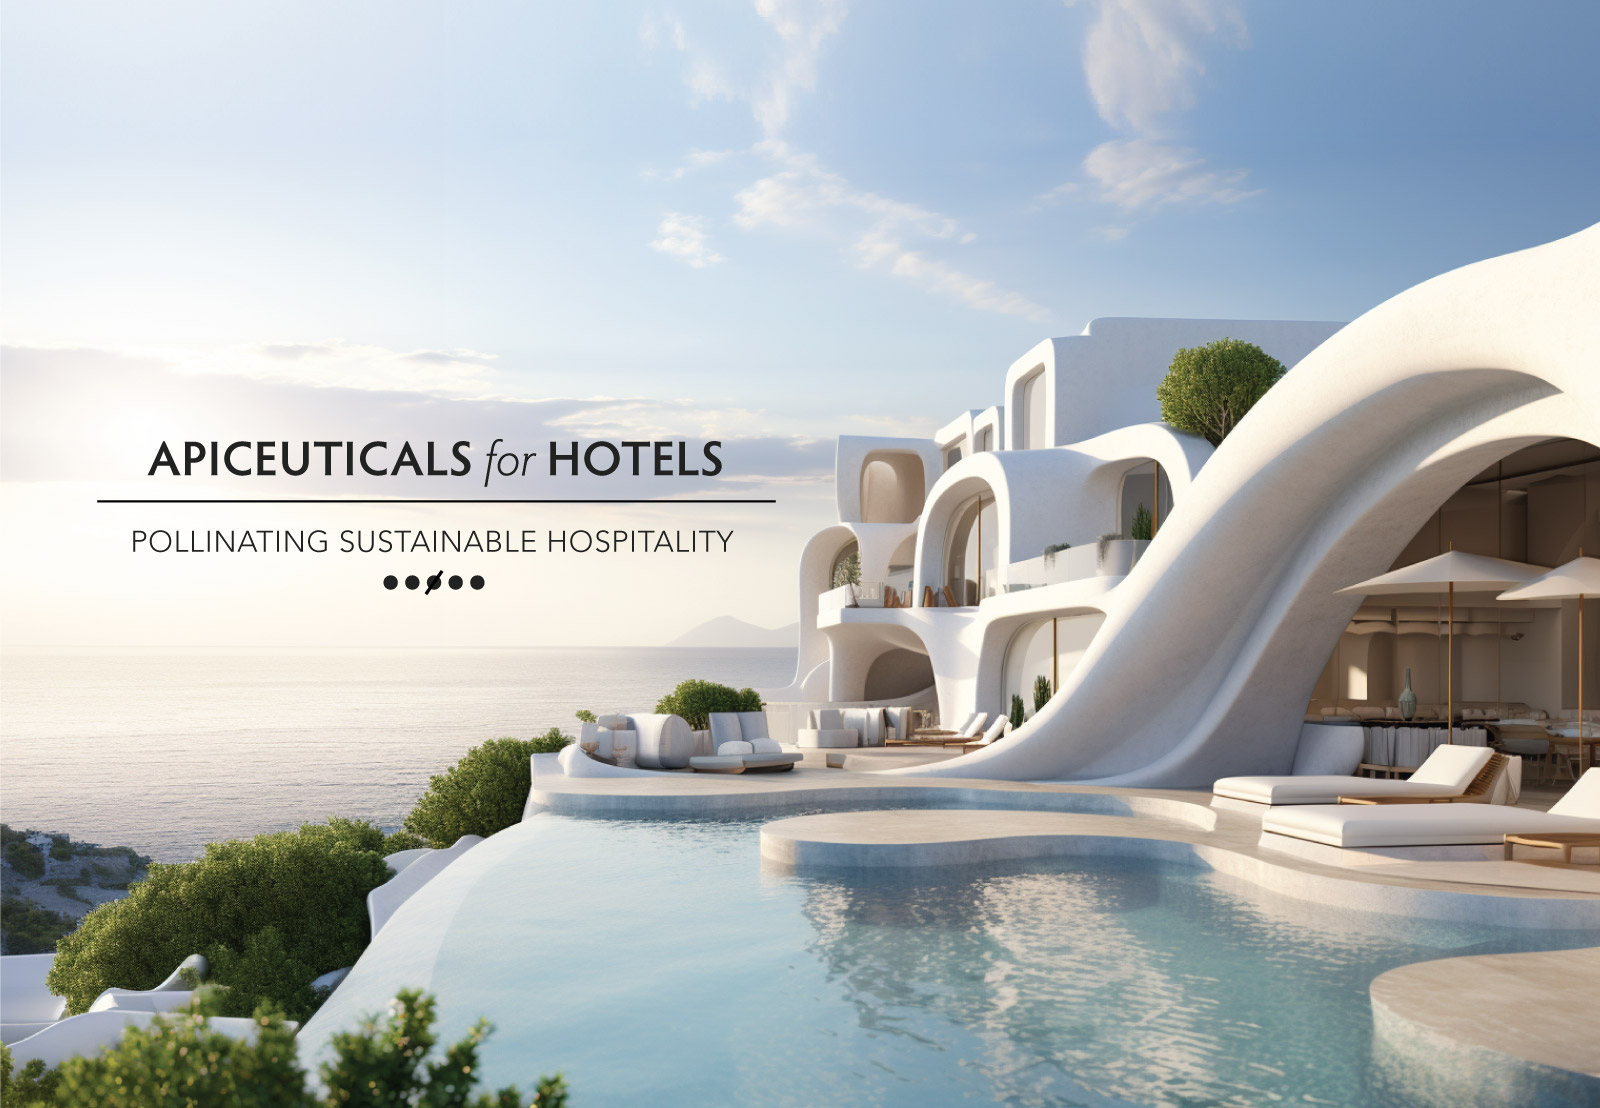 Apiceuticals for Luxury Hotels brand, showing a luxury hotel in a Greek island